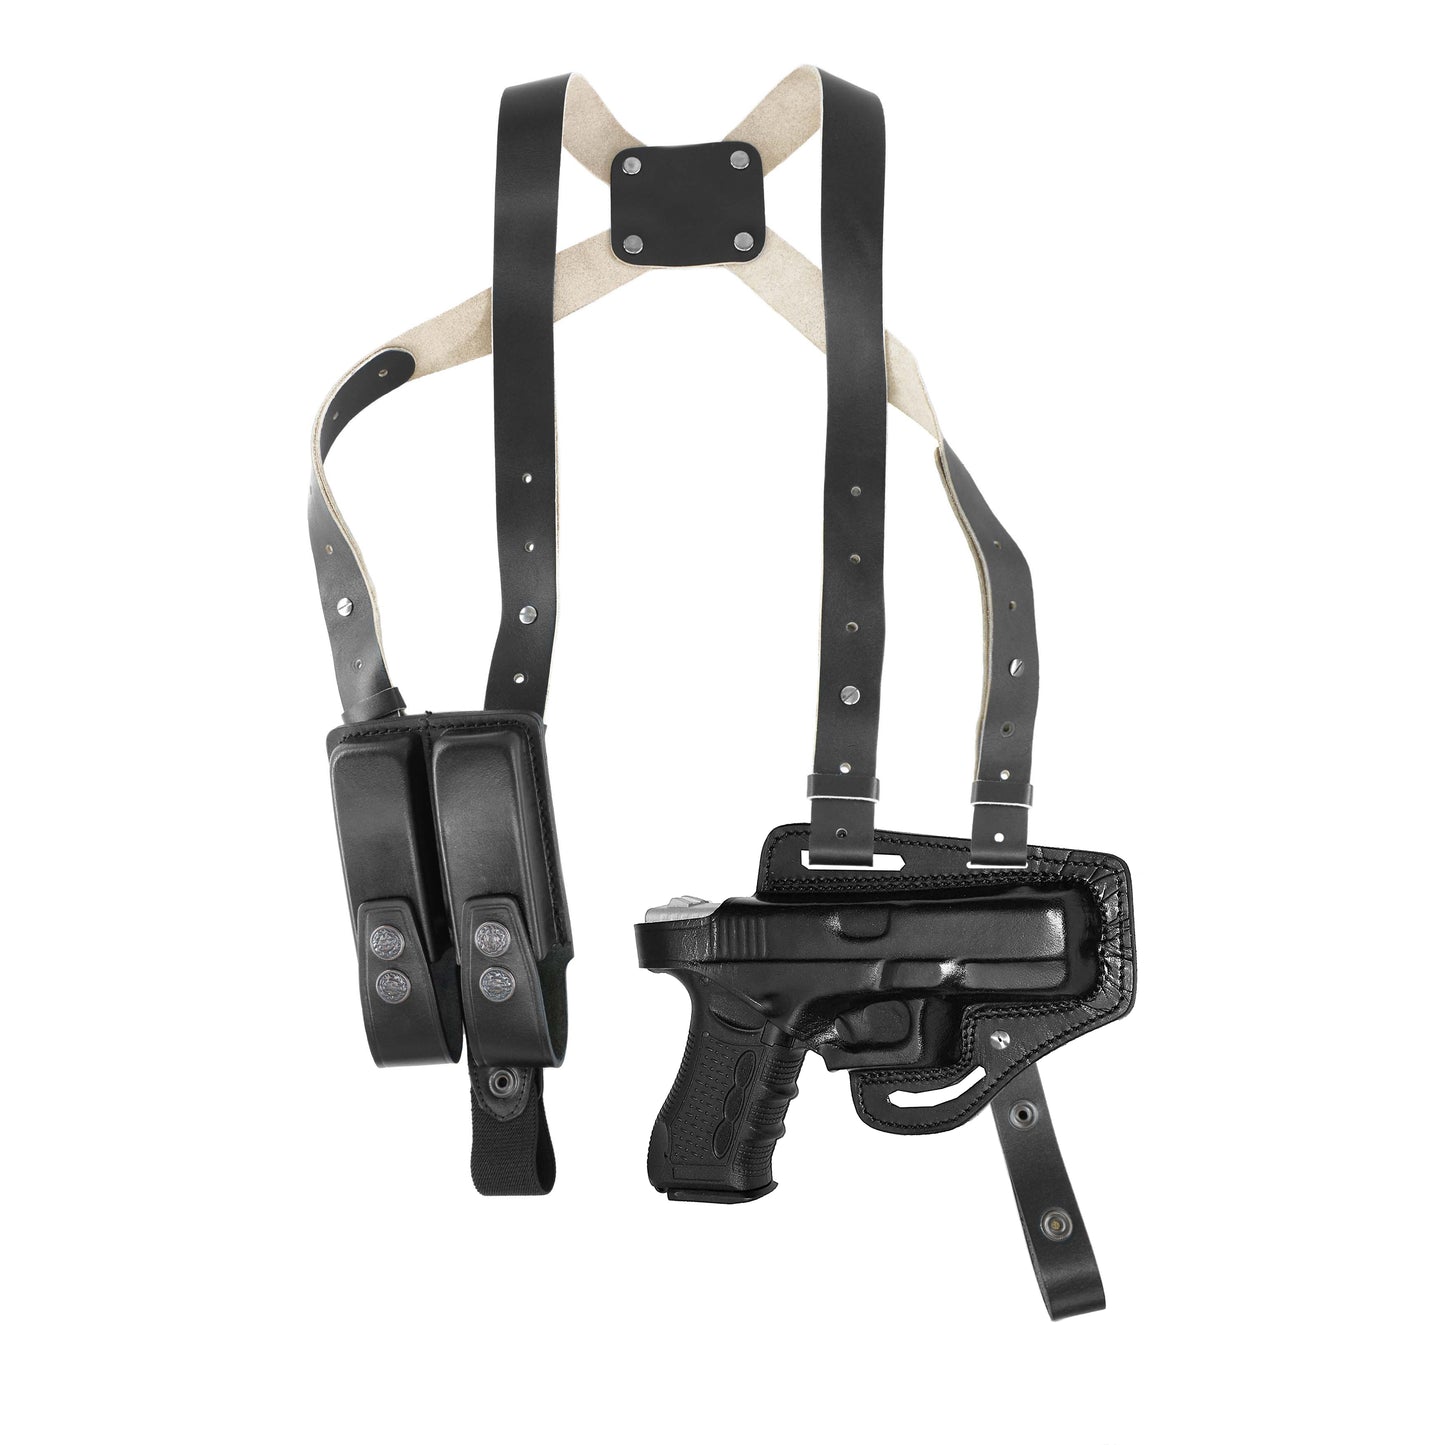 KHS339 Horizontal Shoulder & Belt Holster with Double Magazine Pouch RH Fits Glock 19 Handmade! Free Extension for Big Body Size!